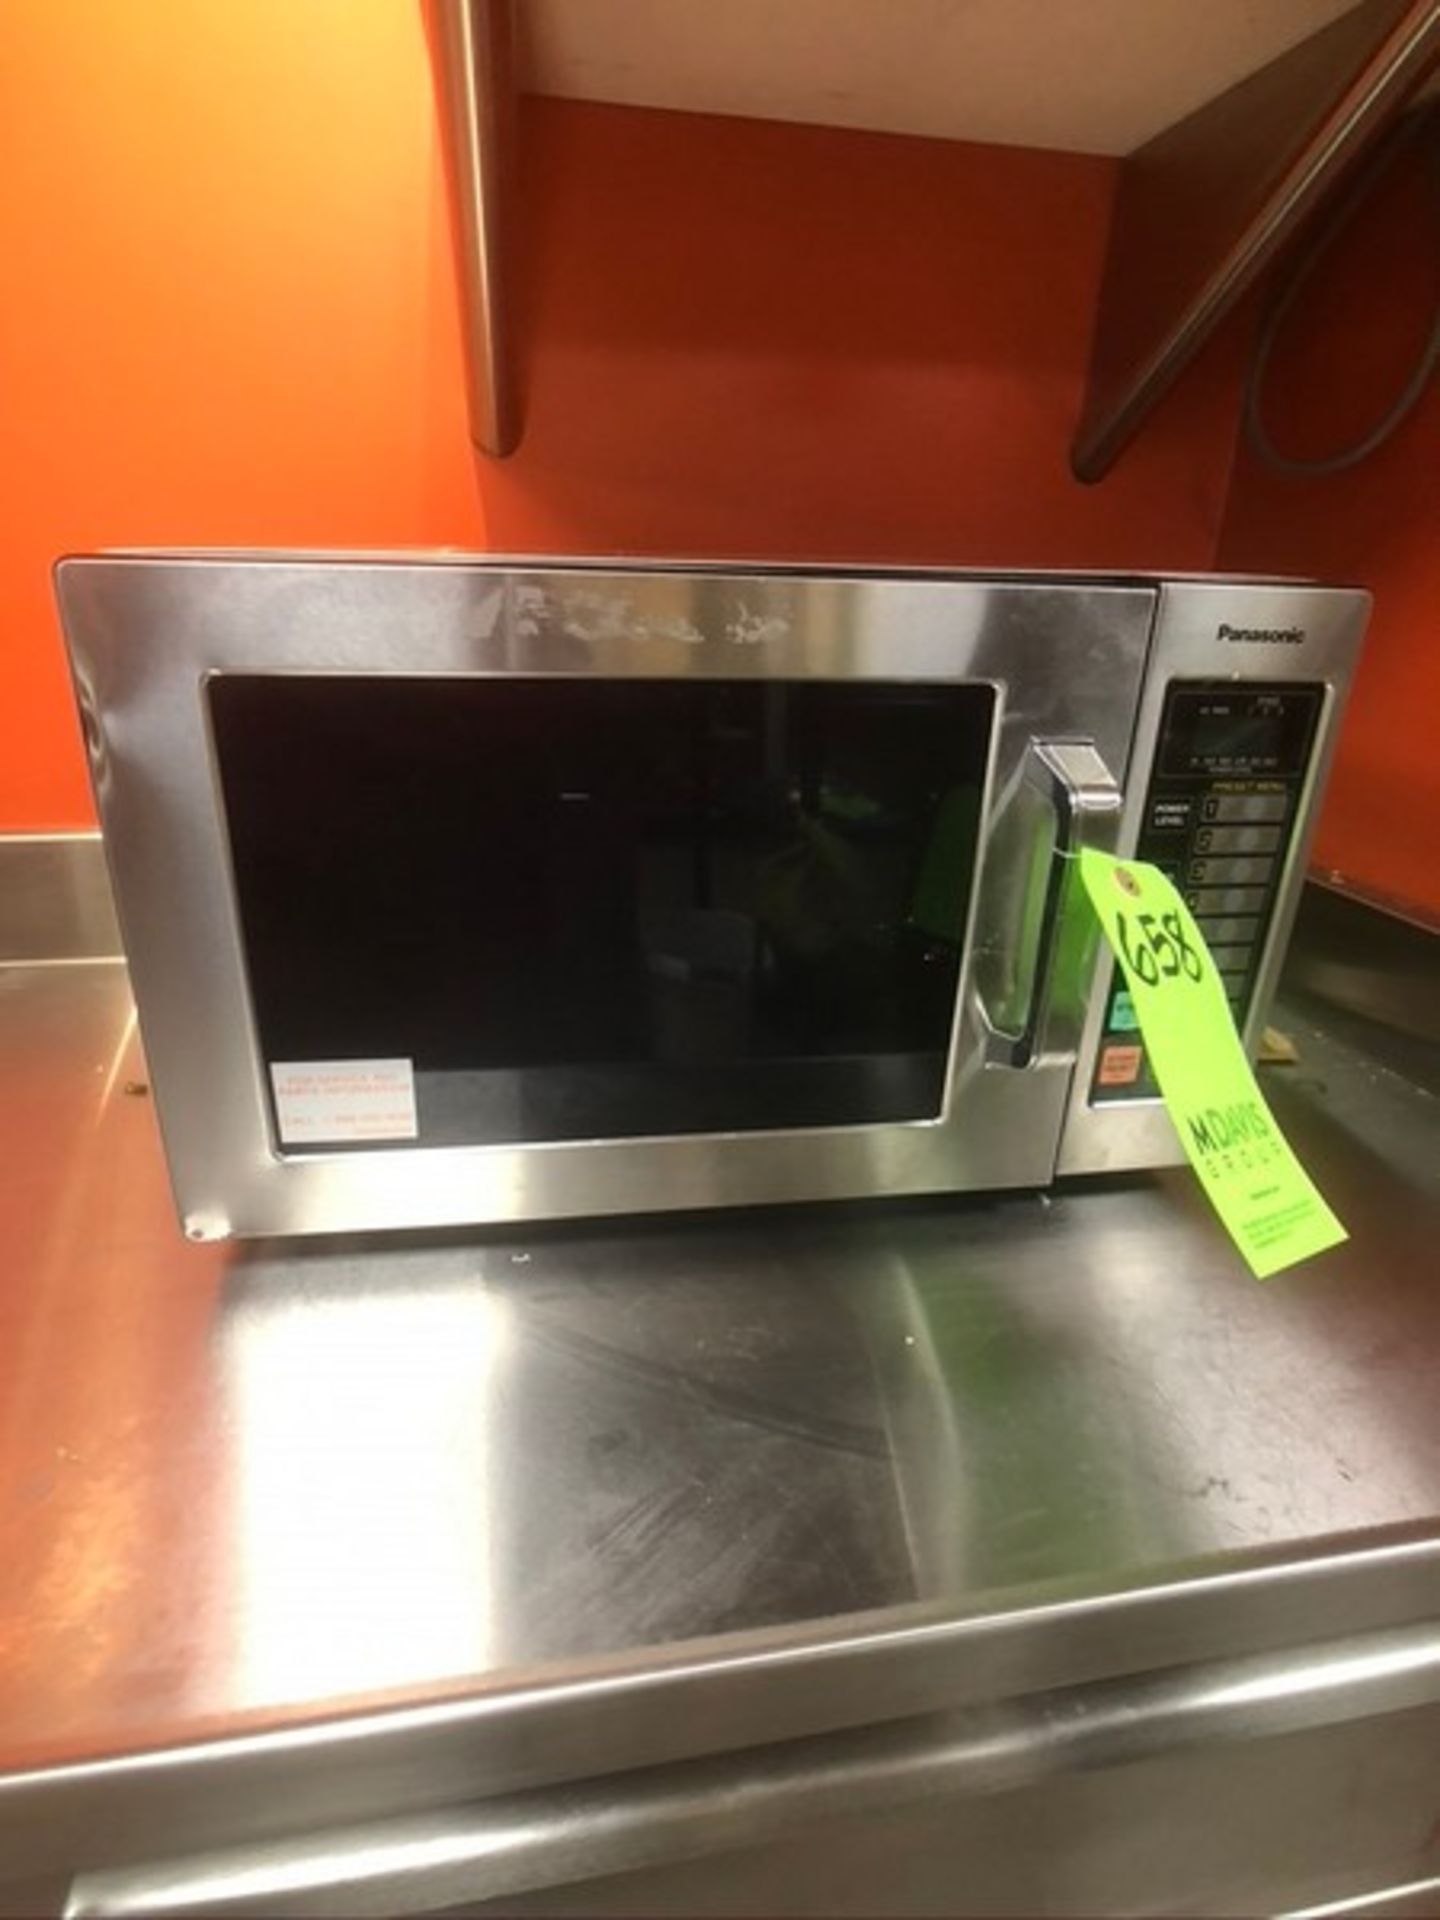 2016 PANASONIC MICROWAVE, MODEL NE - 1064F T, S/N 6H66150172 (INV#74564)(LOCATED AT MDG AUCTION